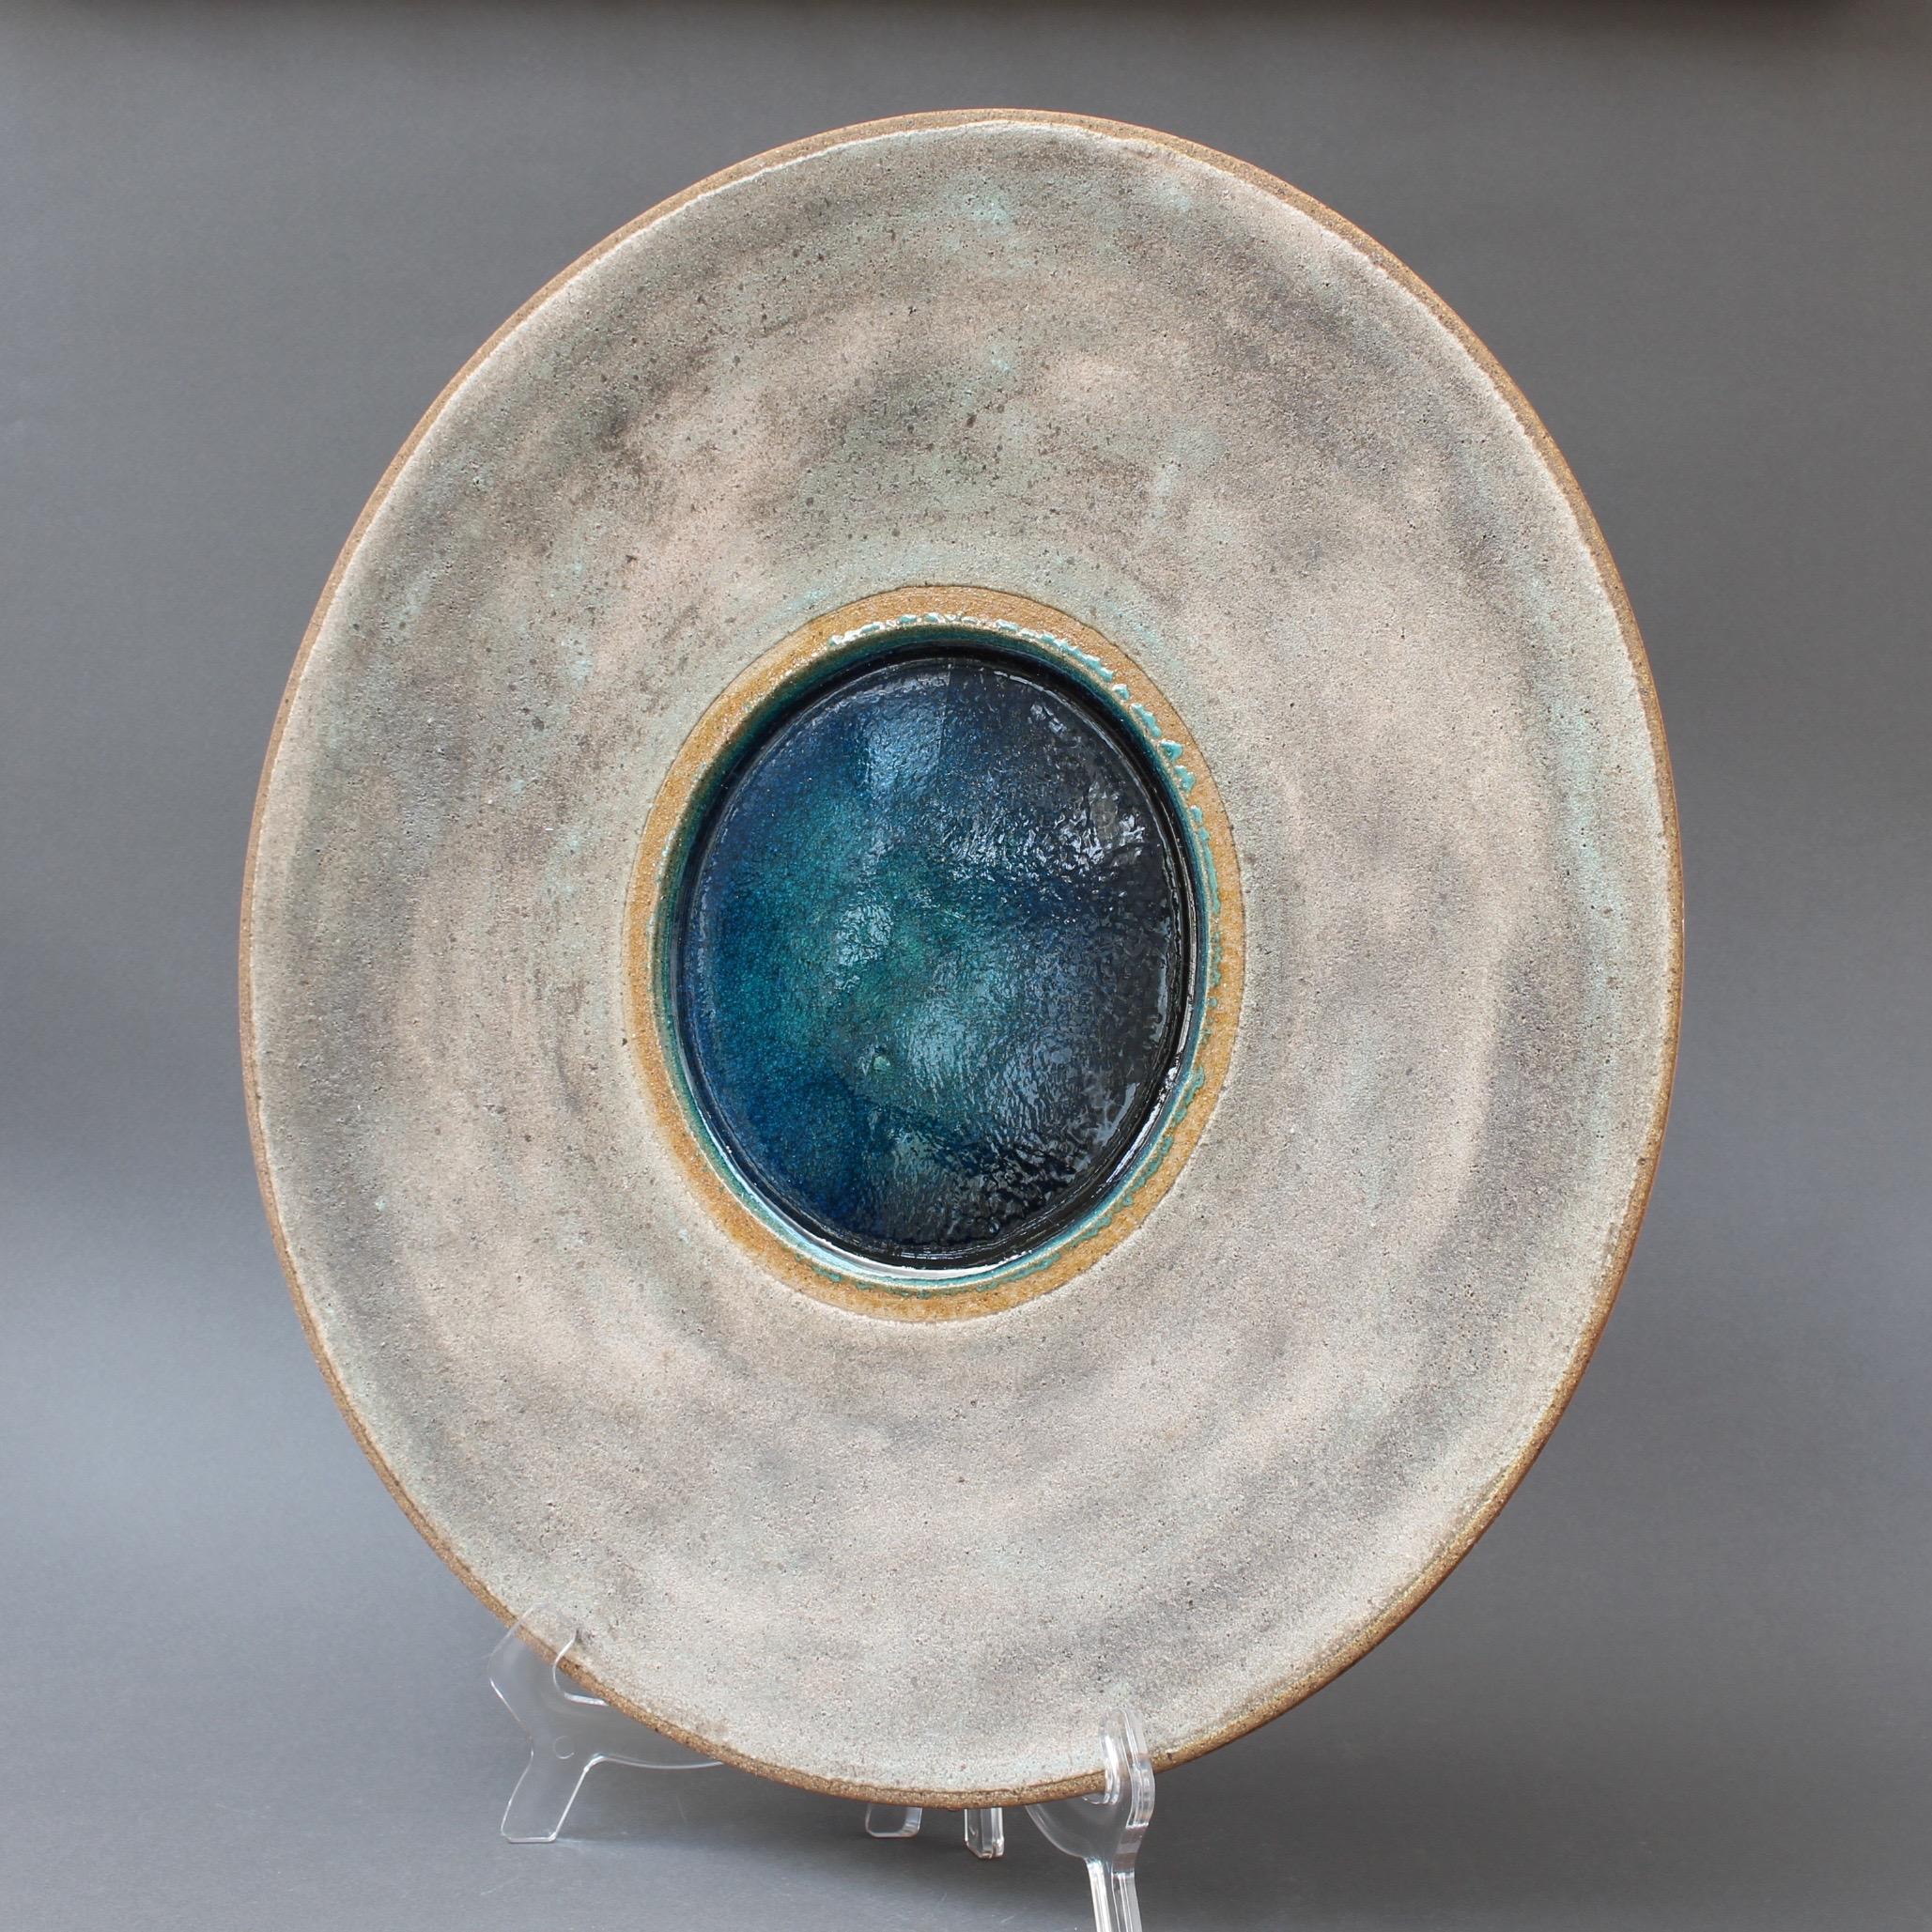 Large stoneware platter with molten glass centre by Bruno Gambone (circa 1980s). A natural stoneware finish in grey and beige with clay brown lip and centre-surround all complement the stunning molten deep blue glass focal point. A rare find from